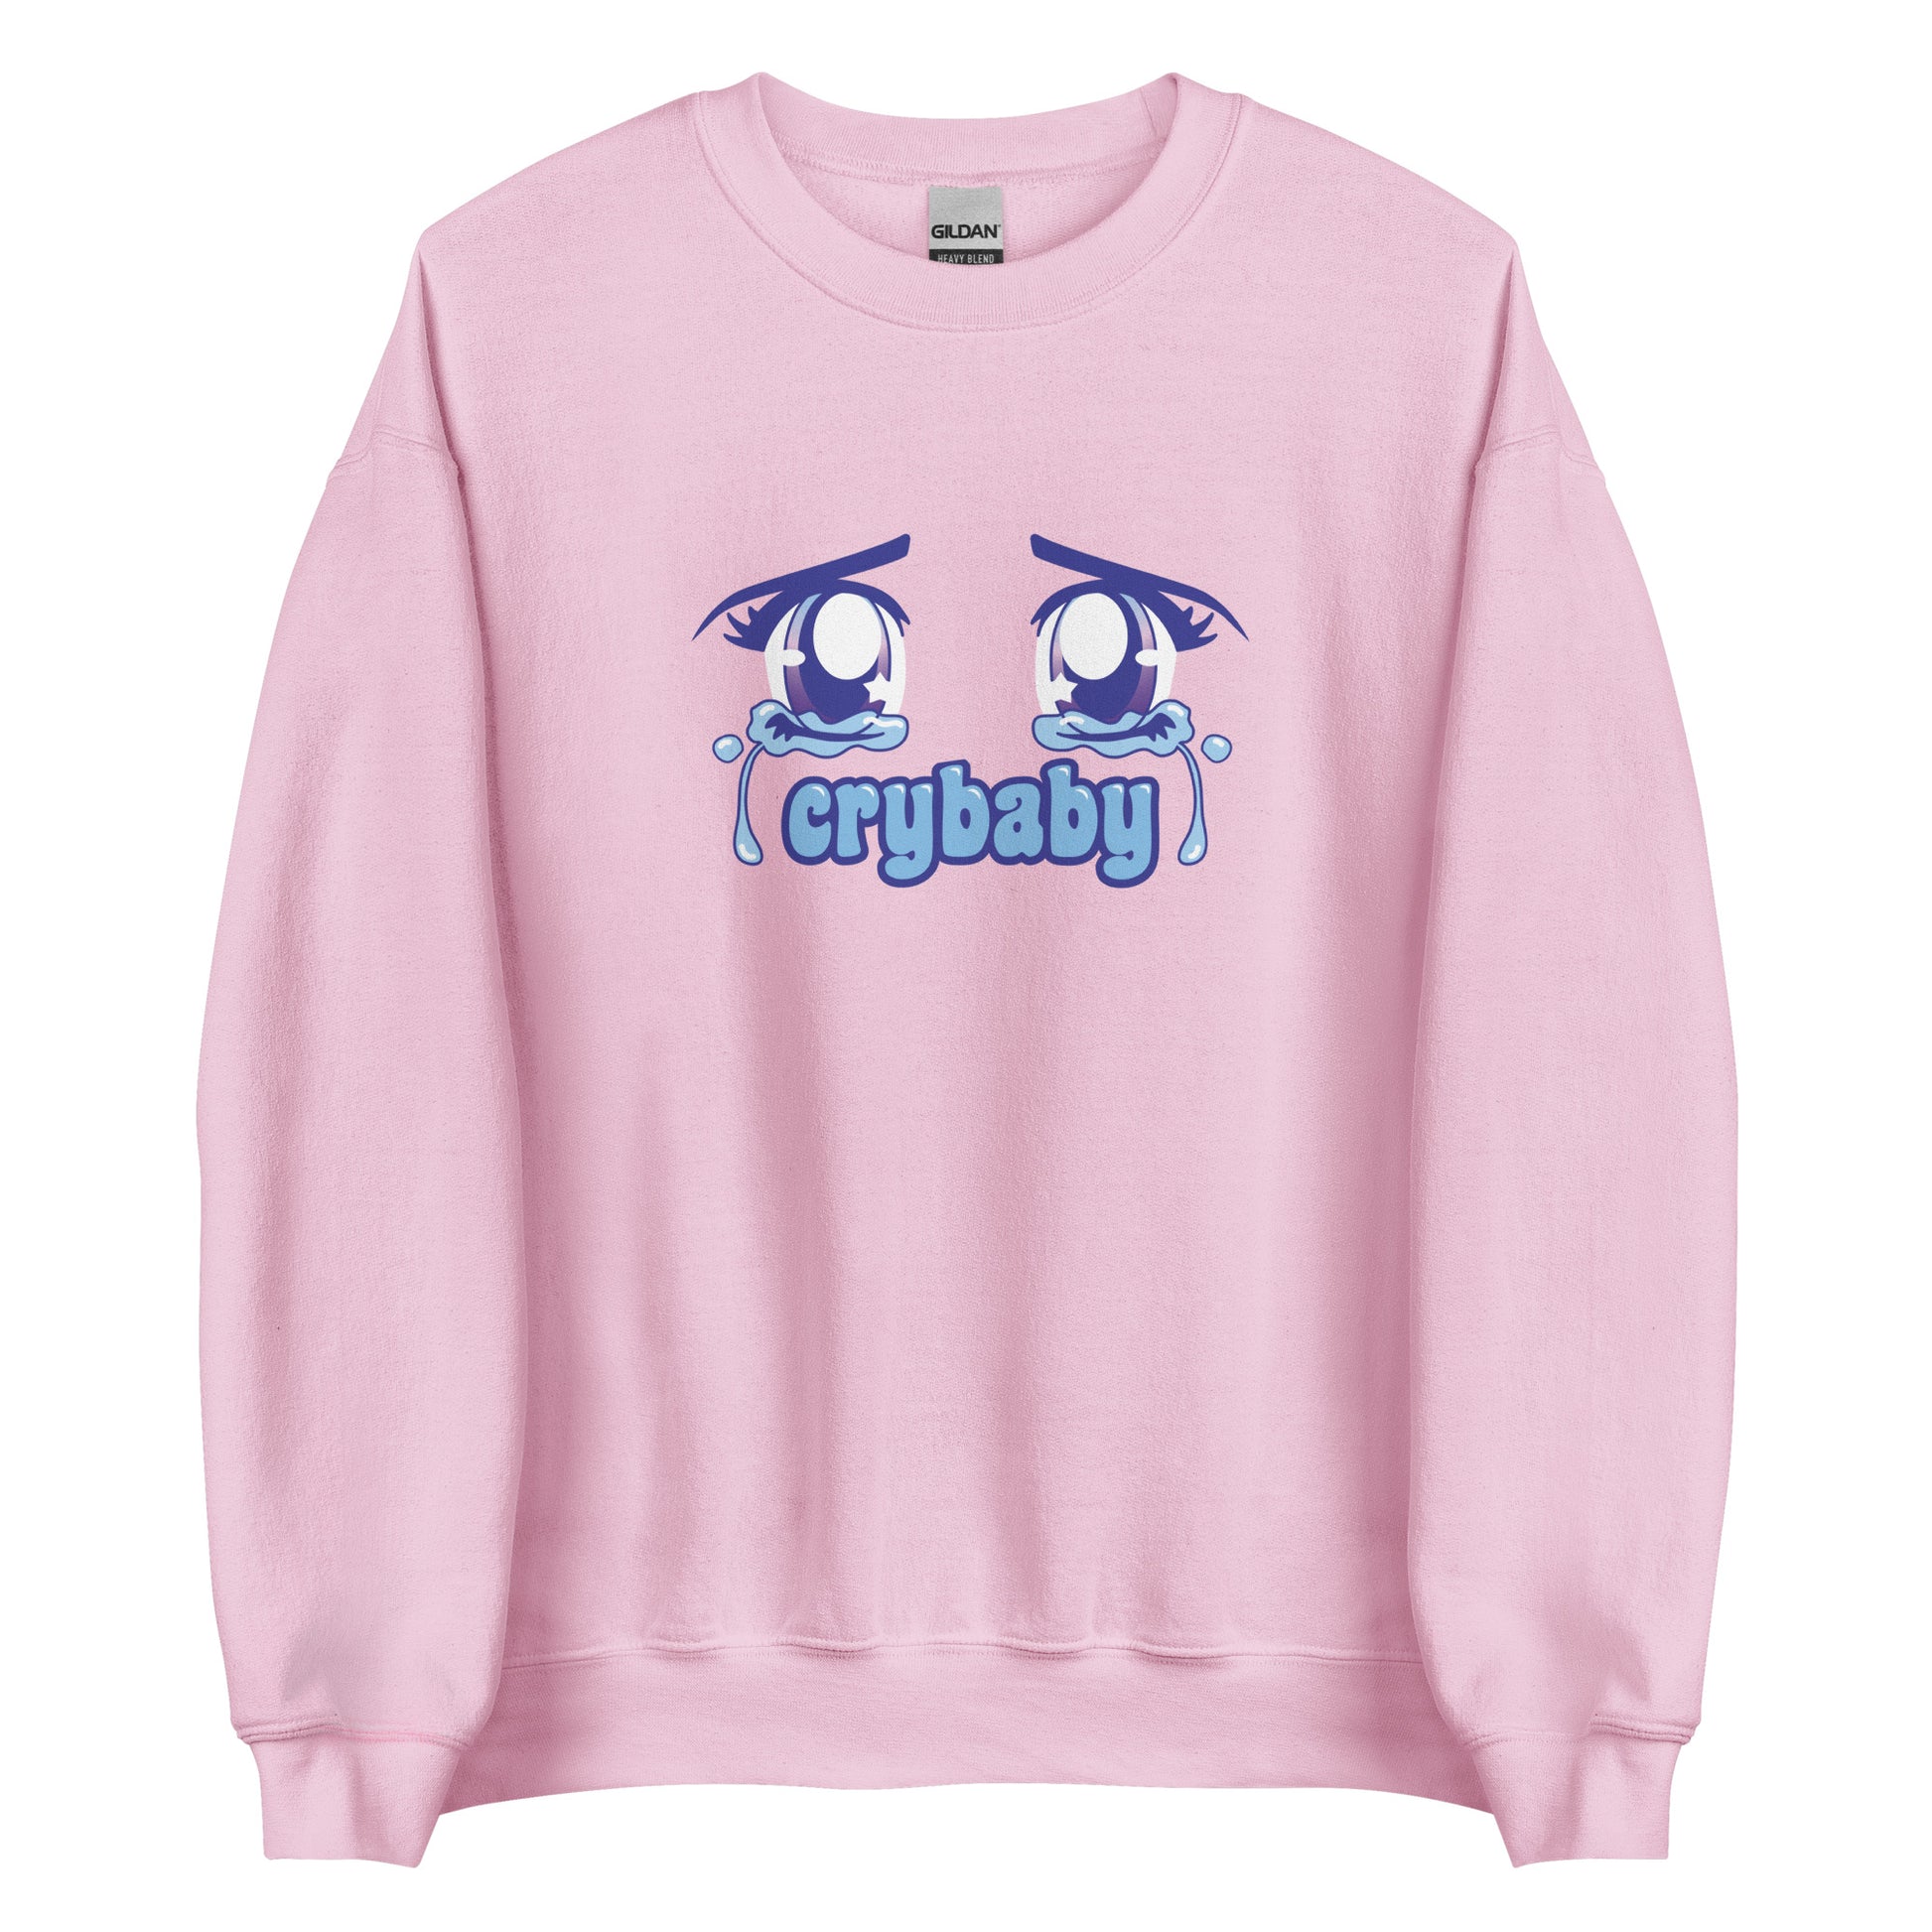 A pink crewneck sweatshirt featuring large, sparkling purple anime eyes with tears streaming down. Text underneath the eyes in a rounded blue font reads "crybaby"